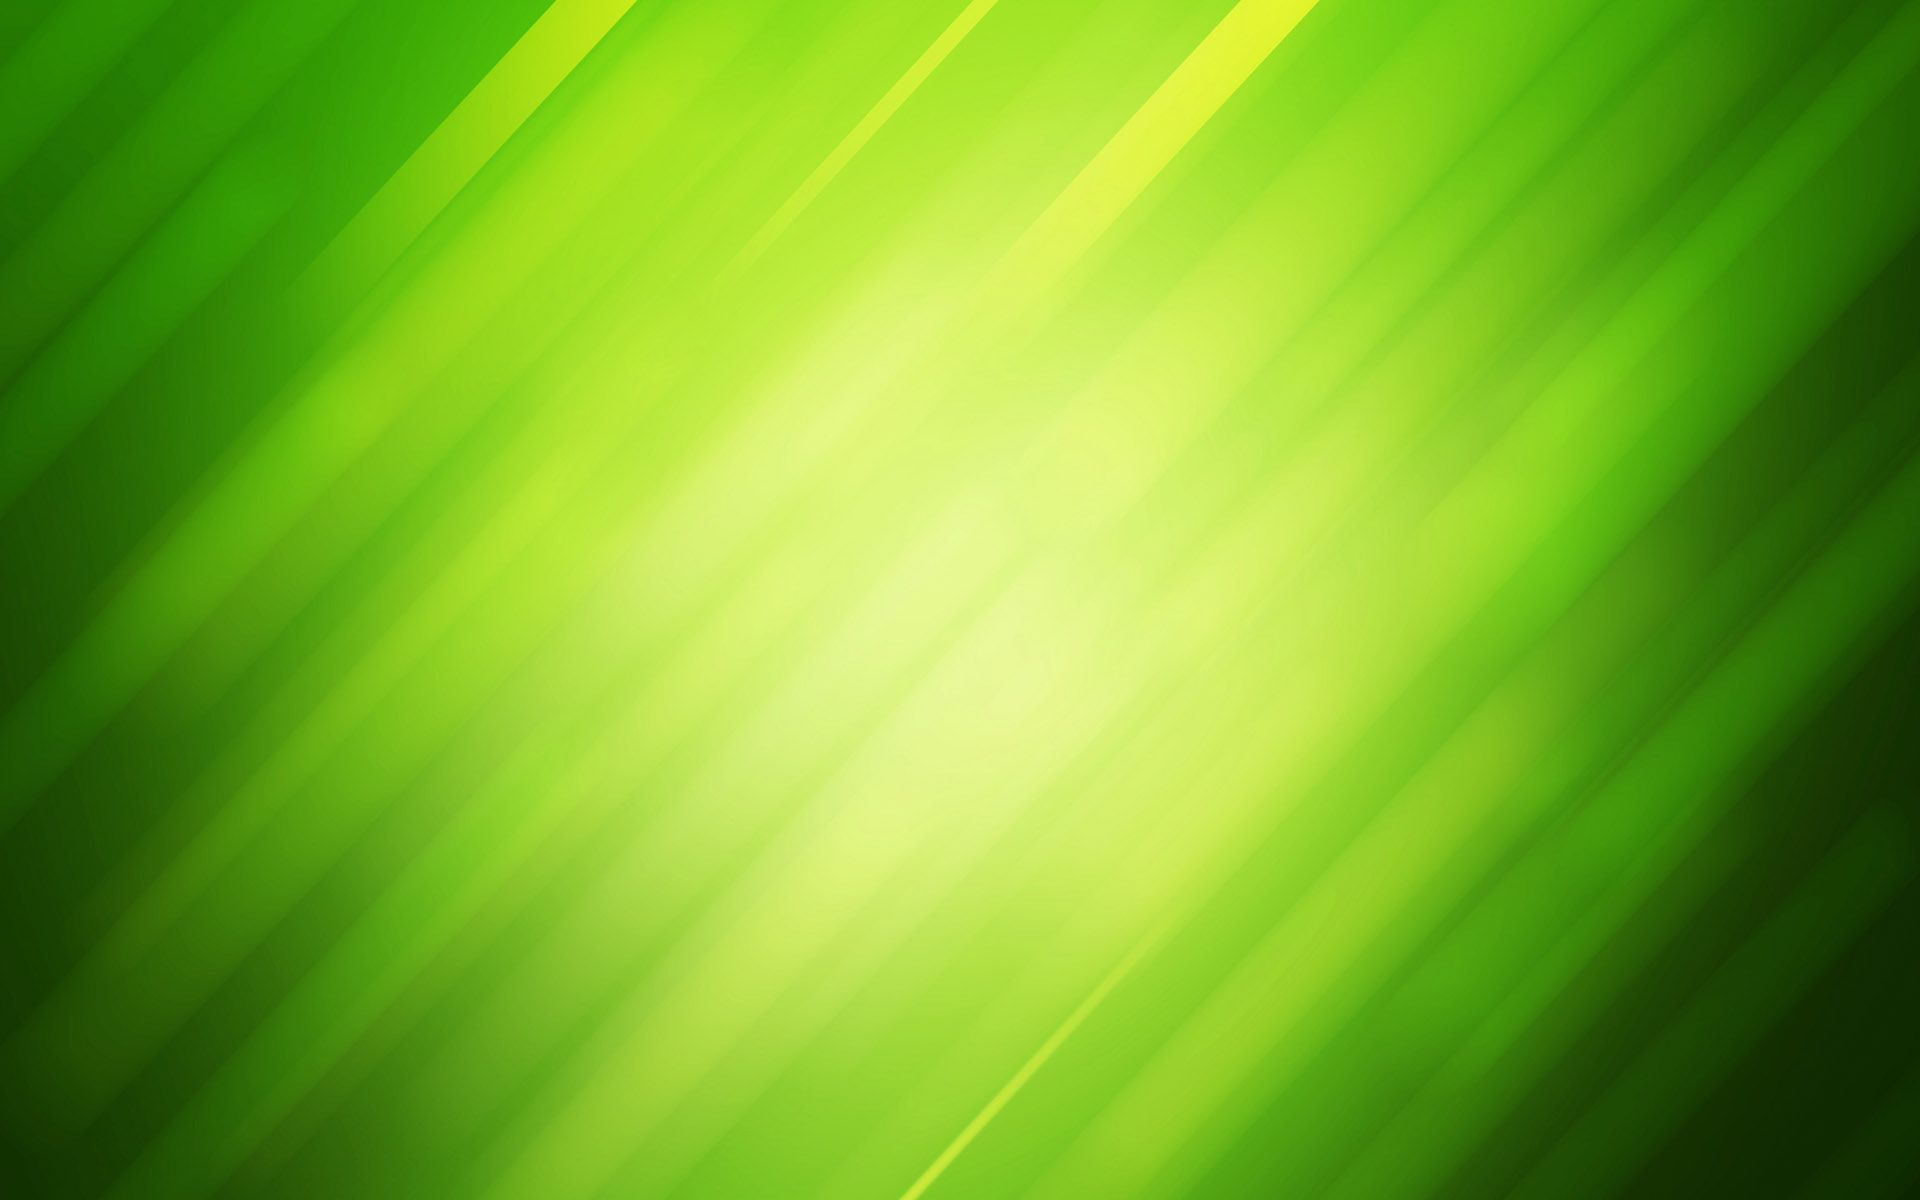 Cool green backgrounds